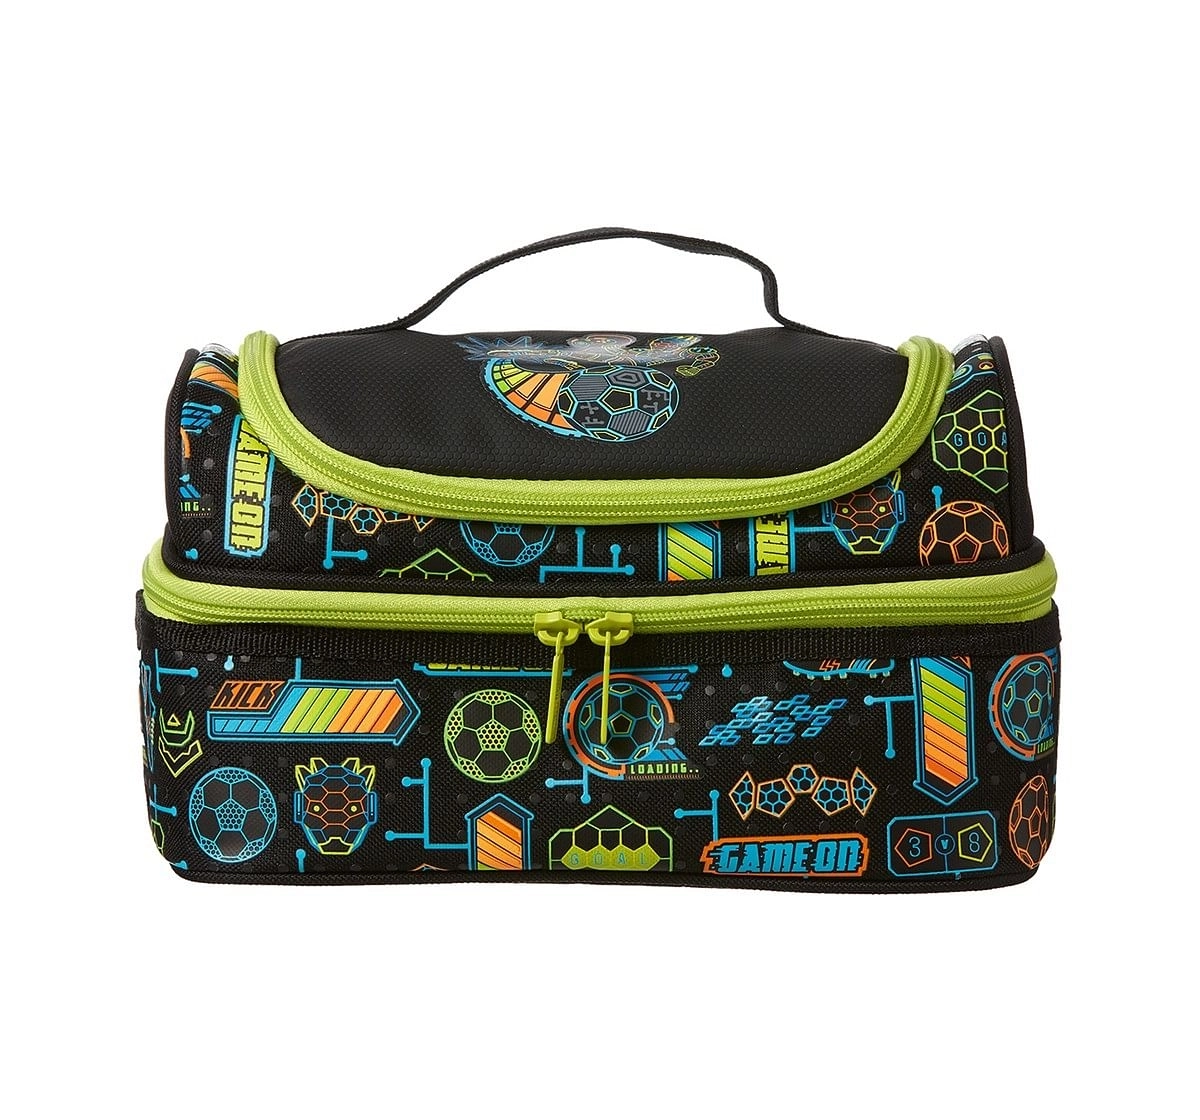 Smiggle Far Away Double Decker Lunchbox - Football Print Bags for Kids age 3Y+ (Black)